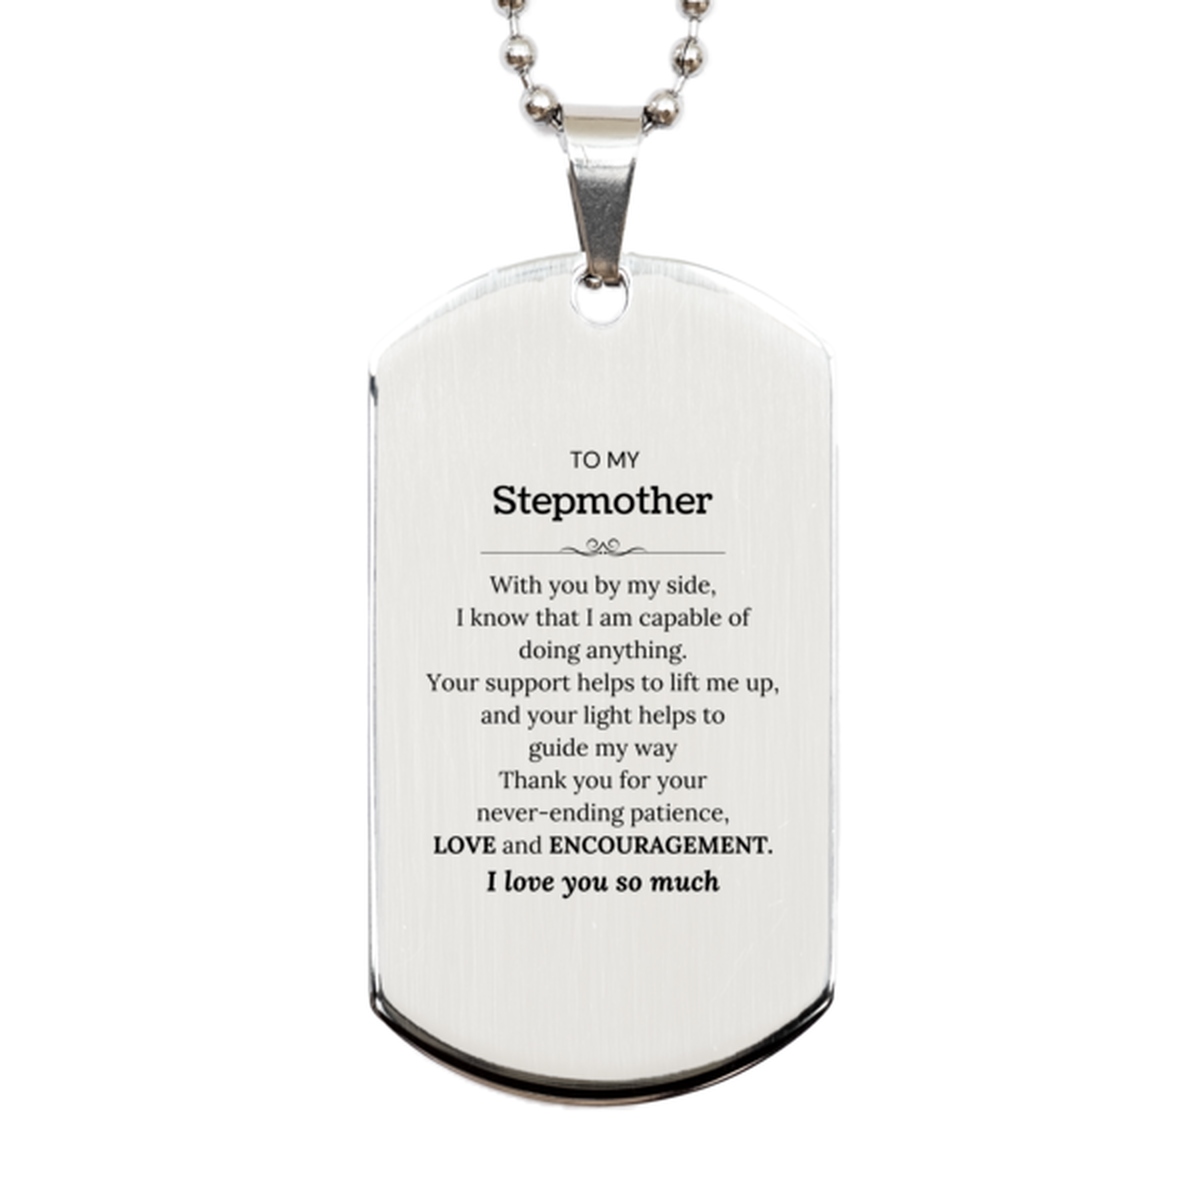 Appreciation Stepmother Silver Dog Tag Gifts, To My Stepmother Birthday Christmas Wedding Keepsake Gifts for Stepmother With you by my side, I know that I am capable of doing anything. I love you so much